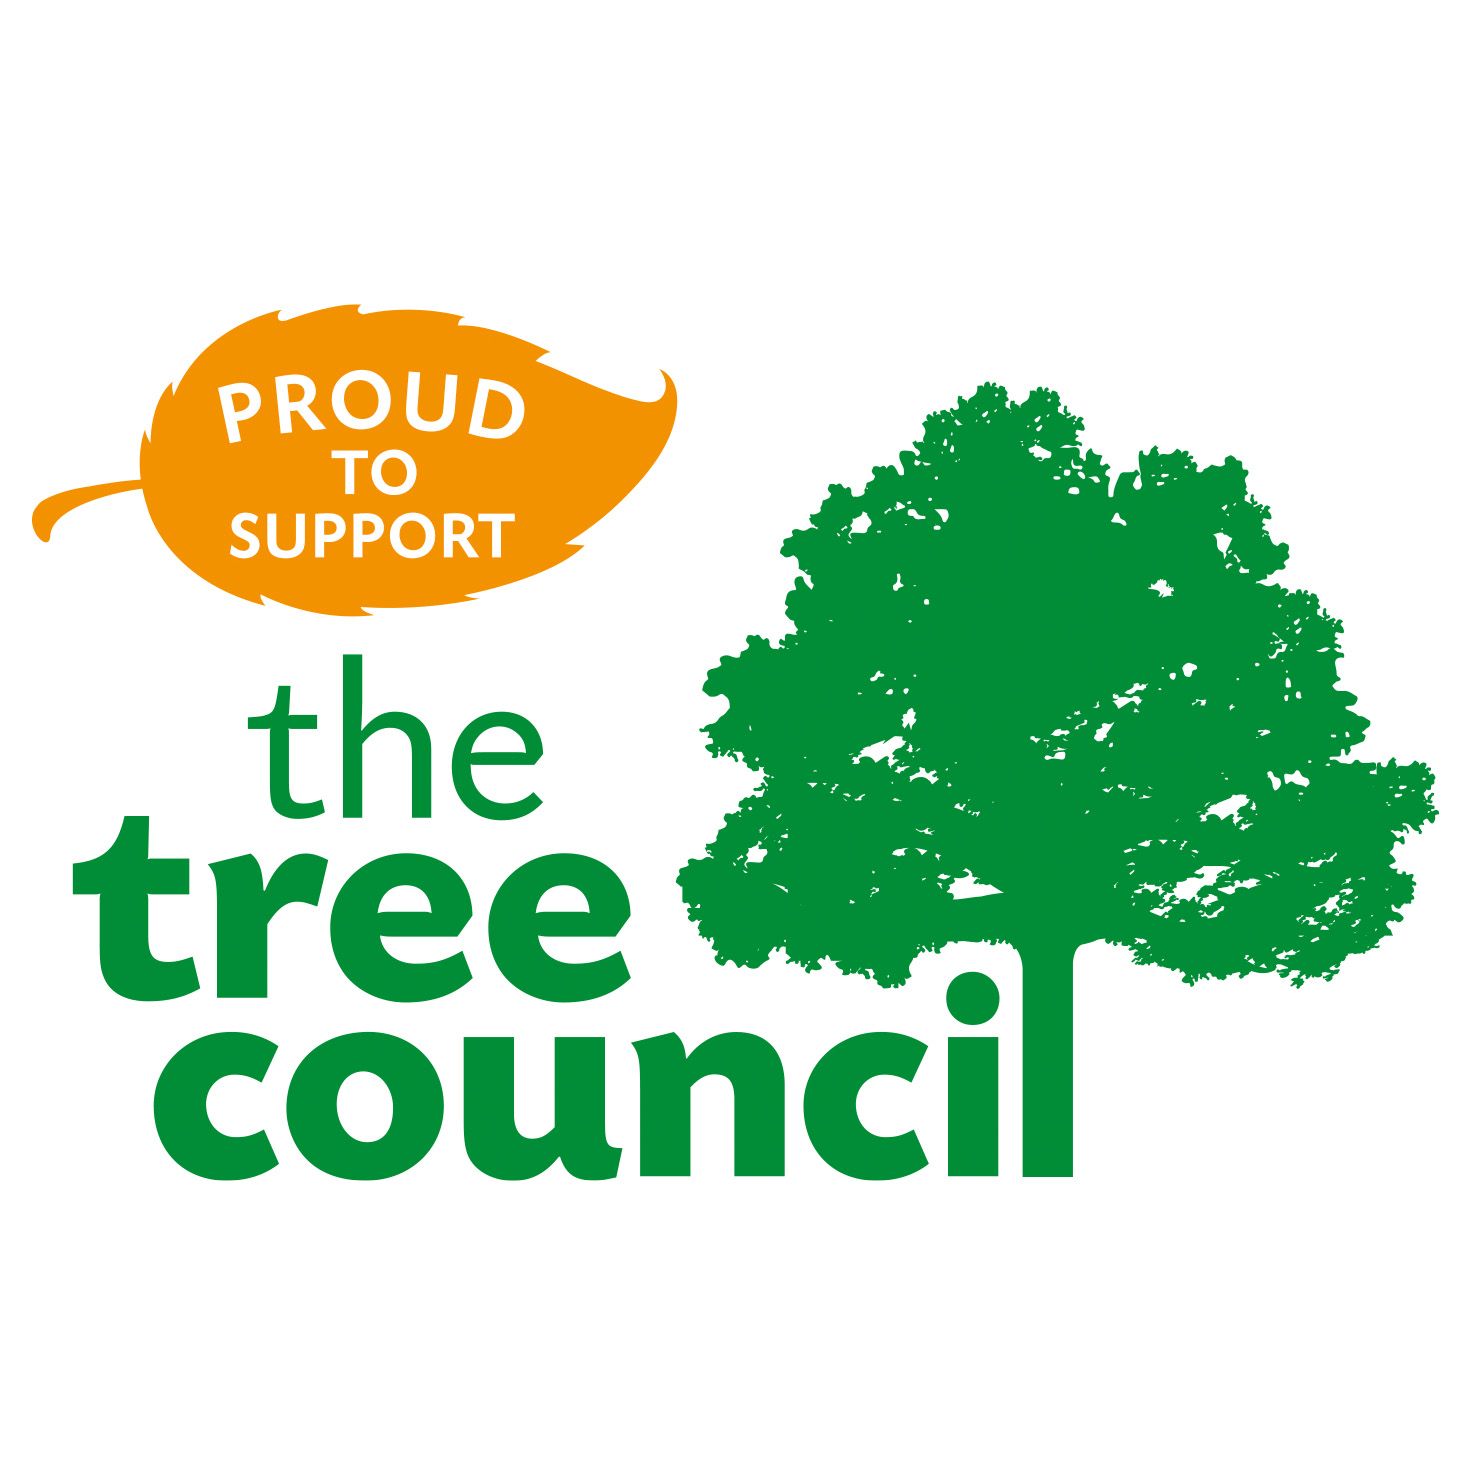 Proud Supporters of The Tree Council image